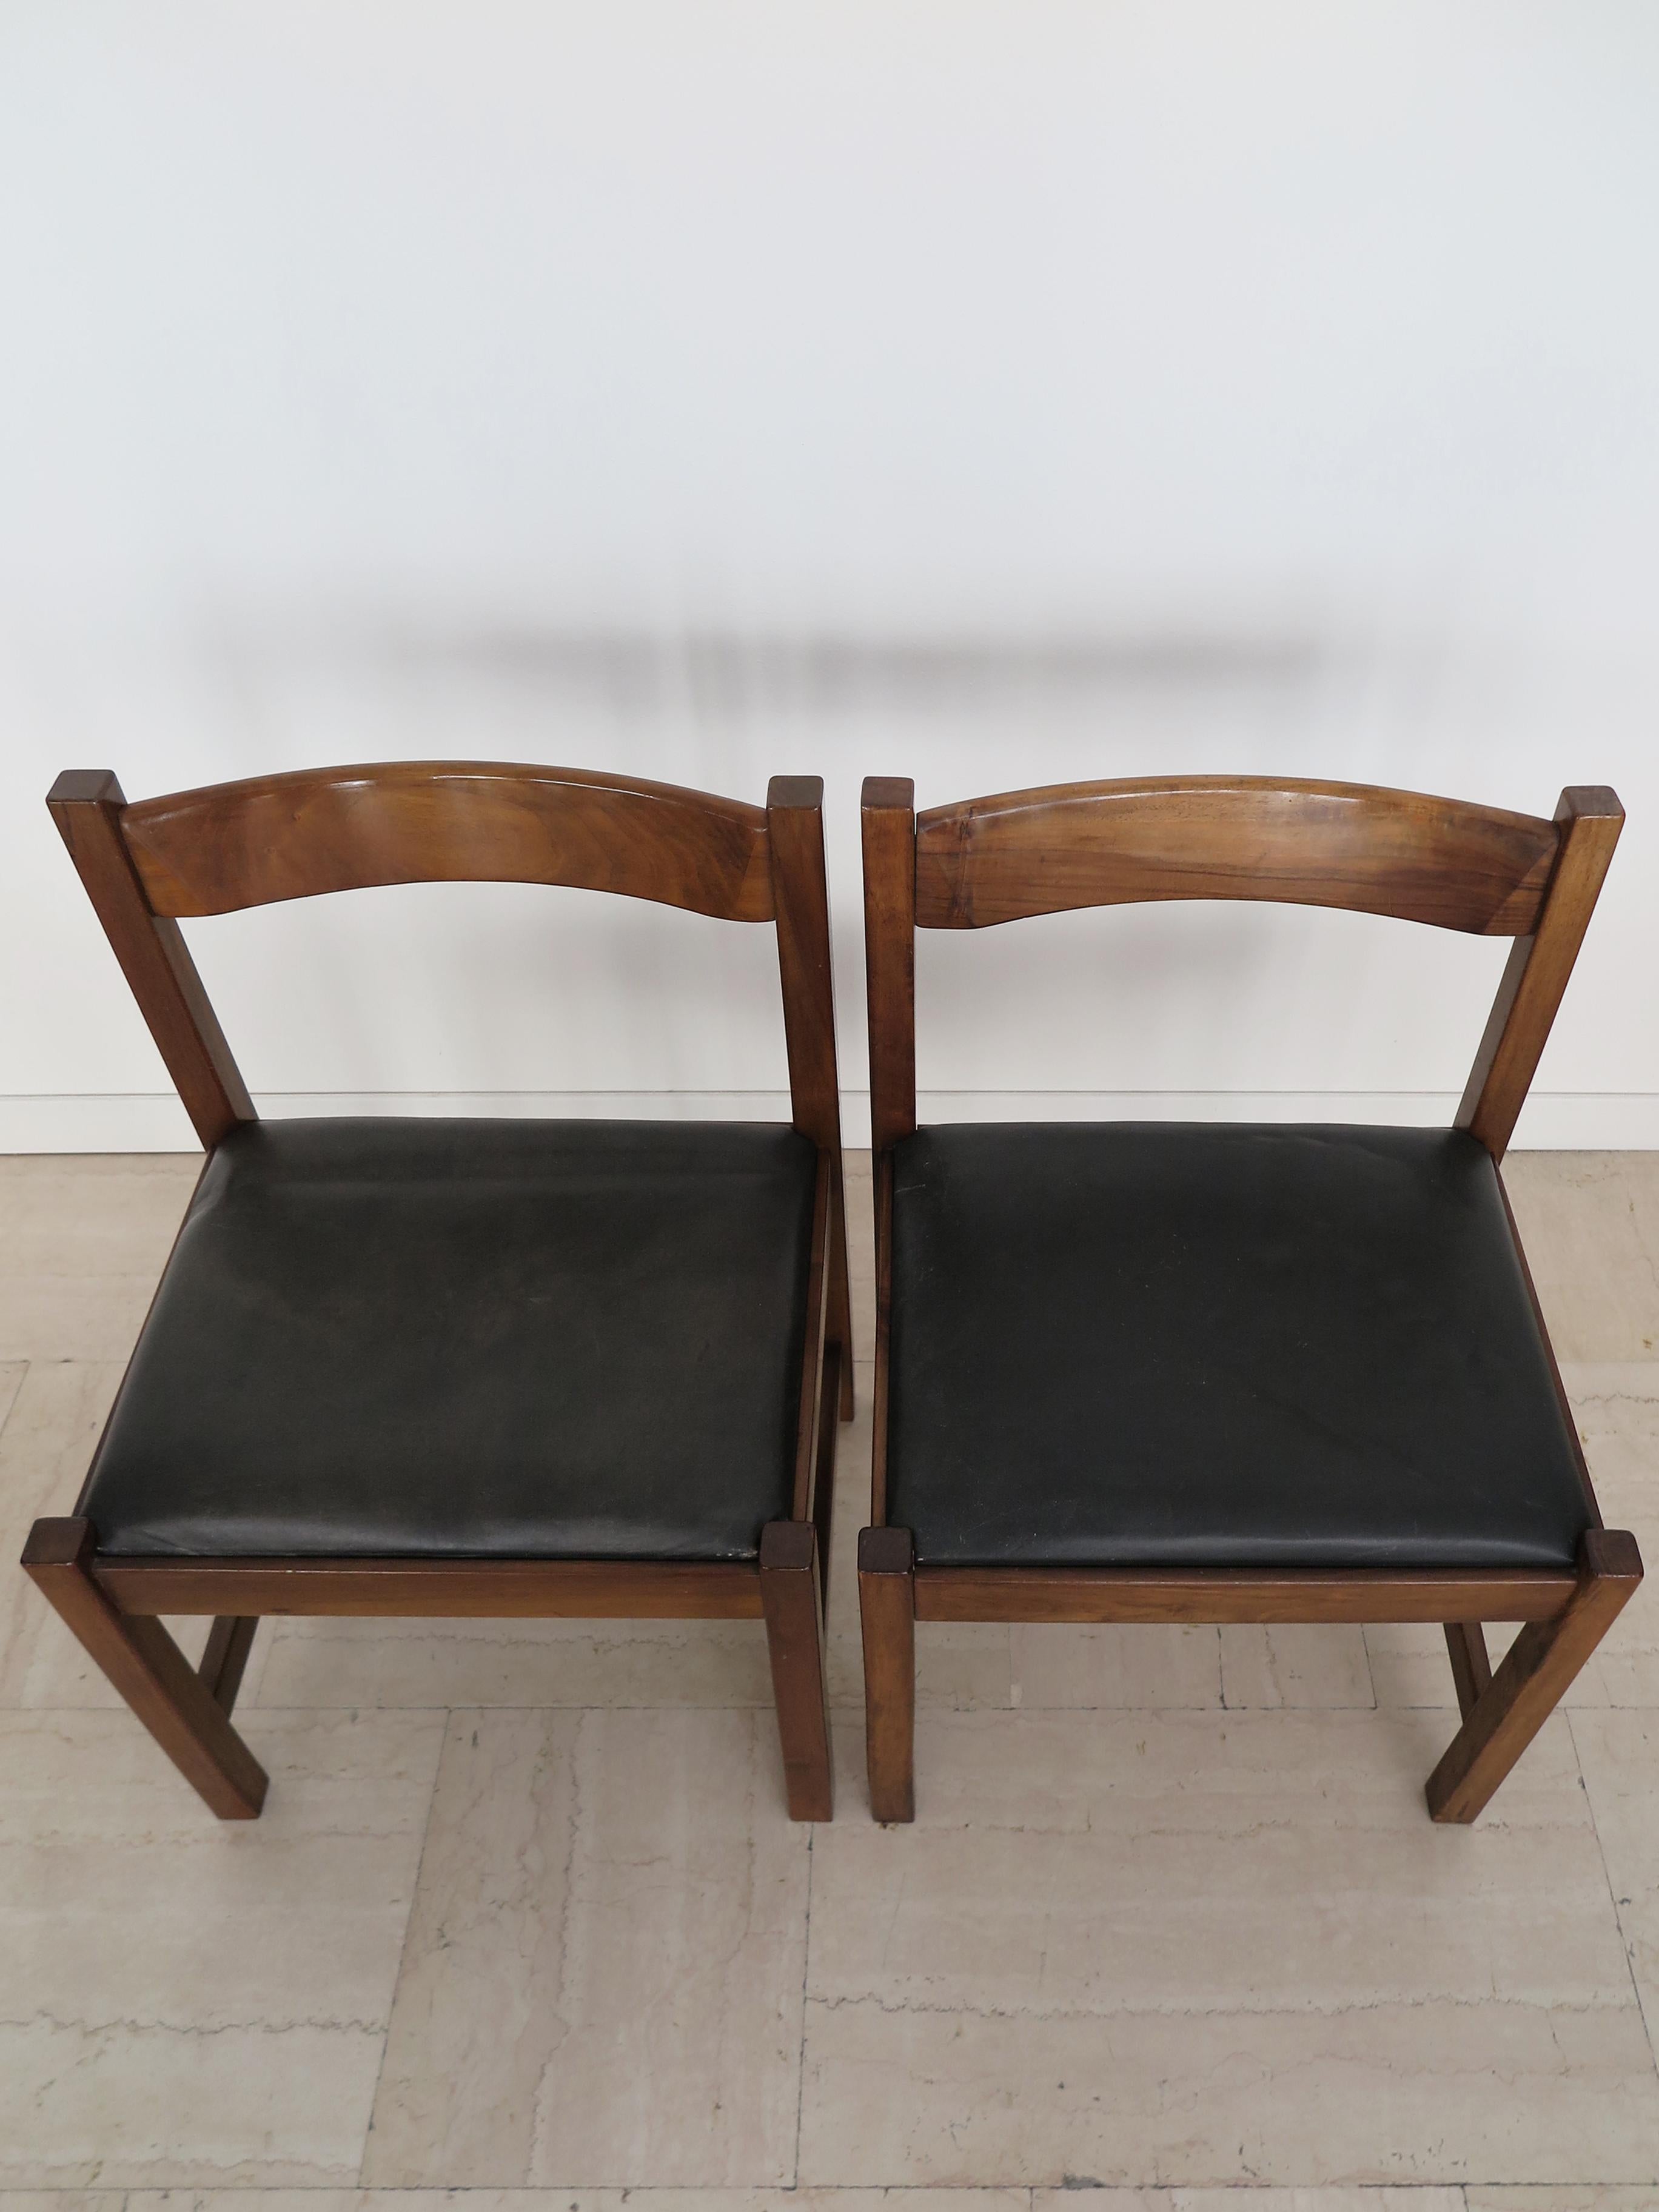 G. Michelucci for Poltronova Italian Midcentury Wood Leather Dining Chairs 1960s For Sale 4